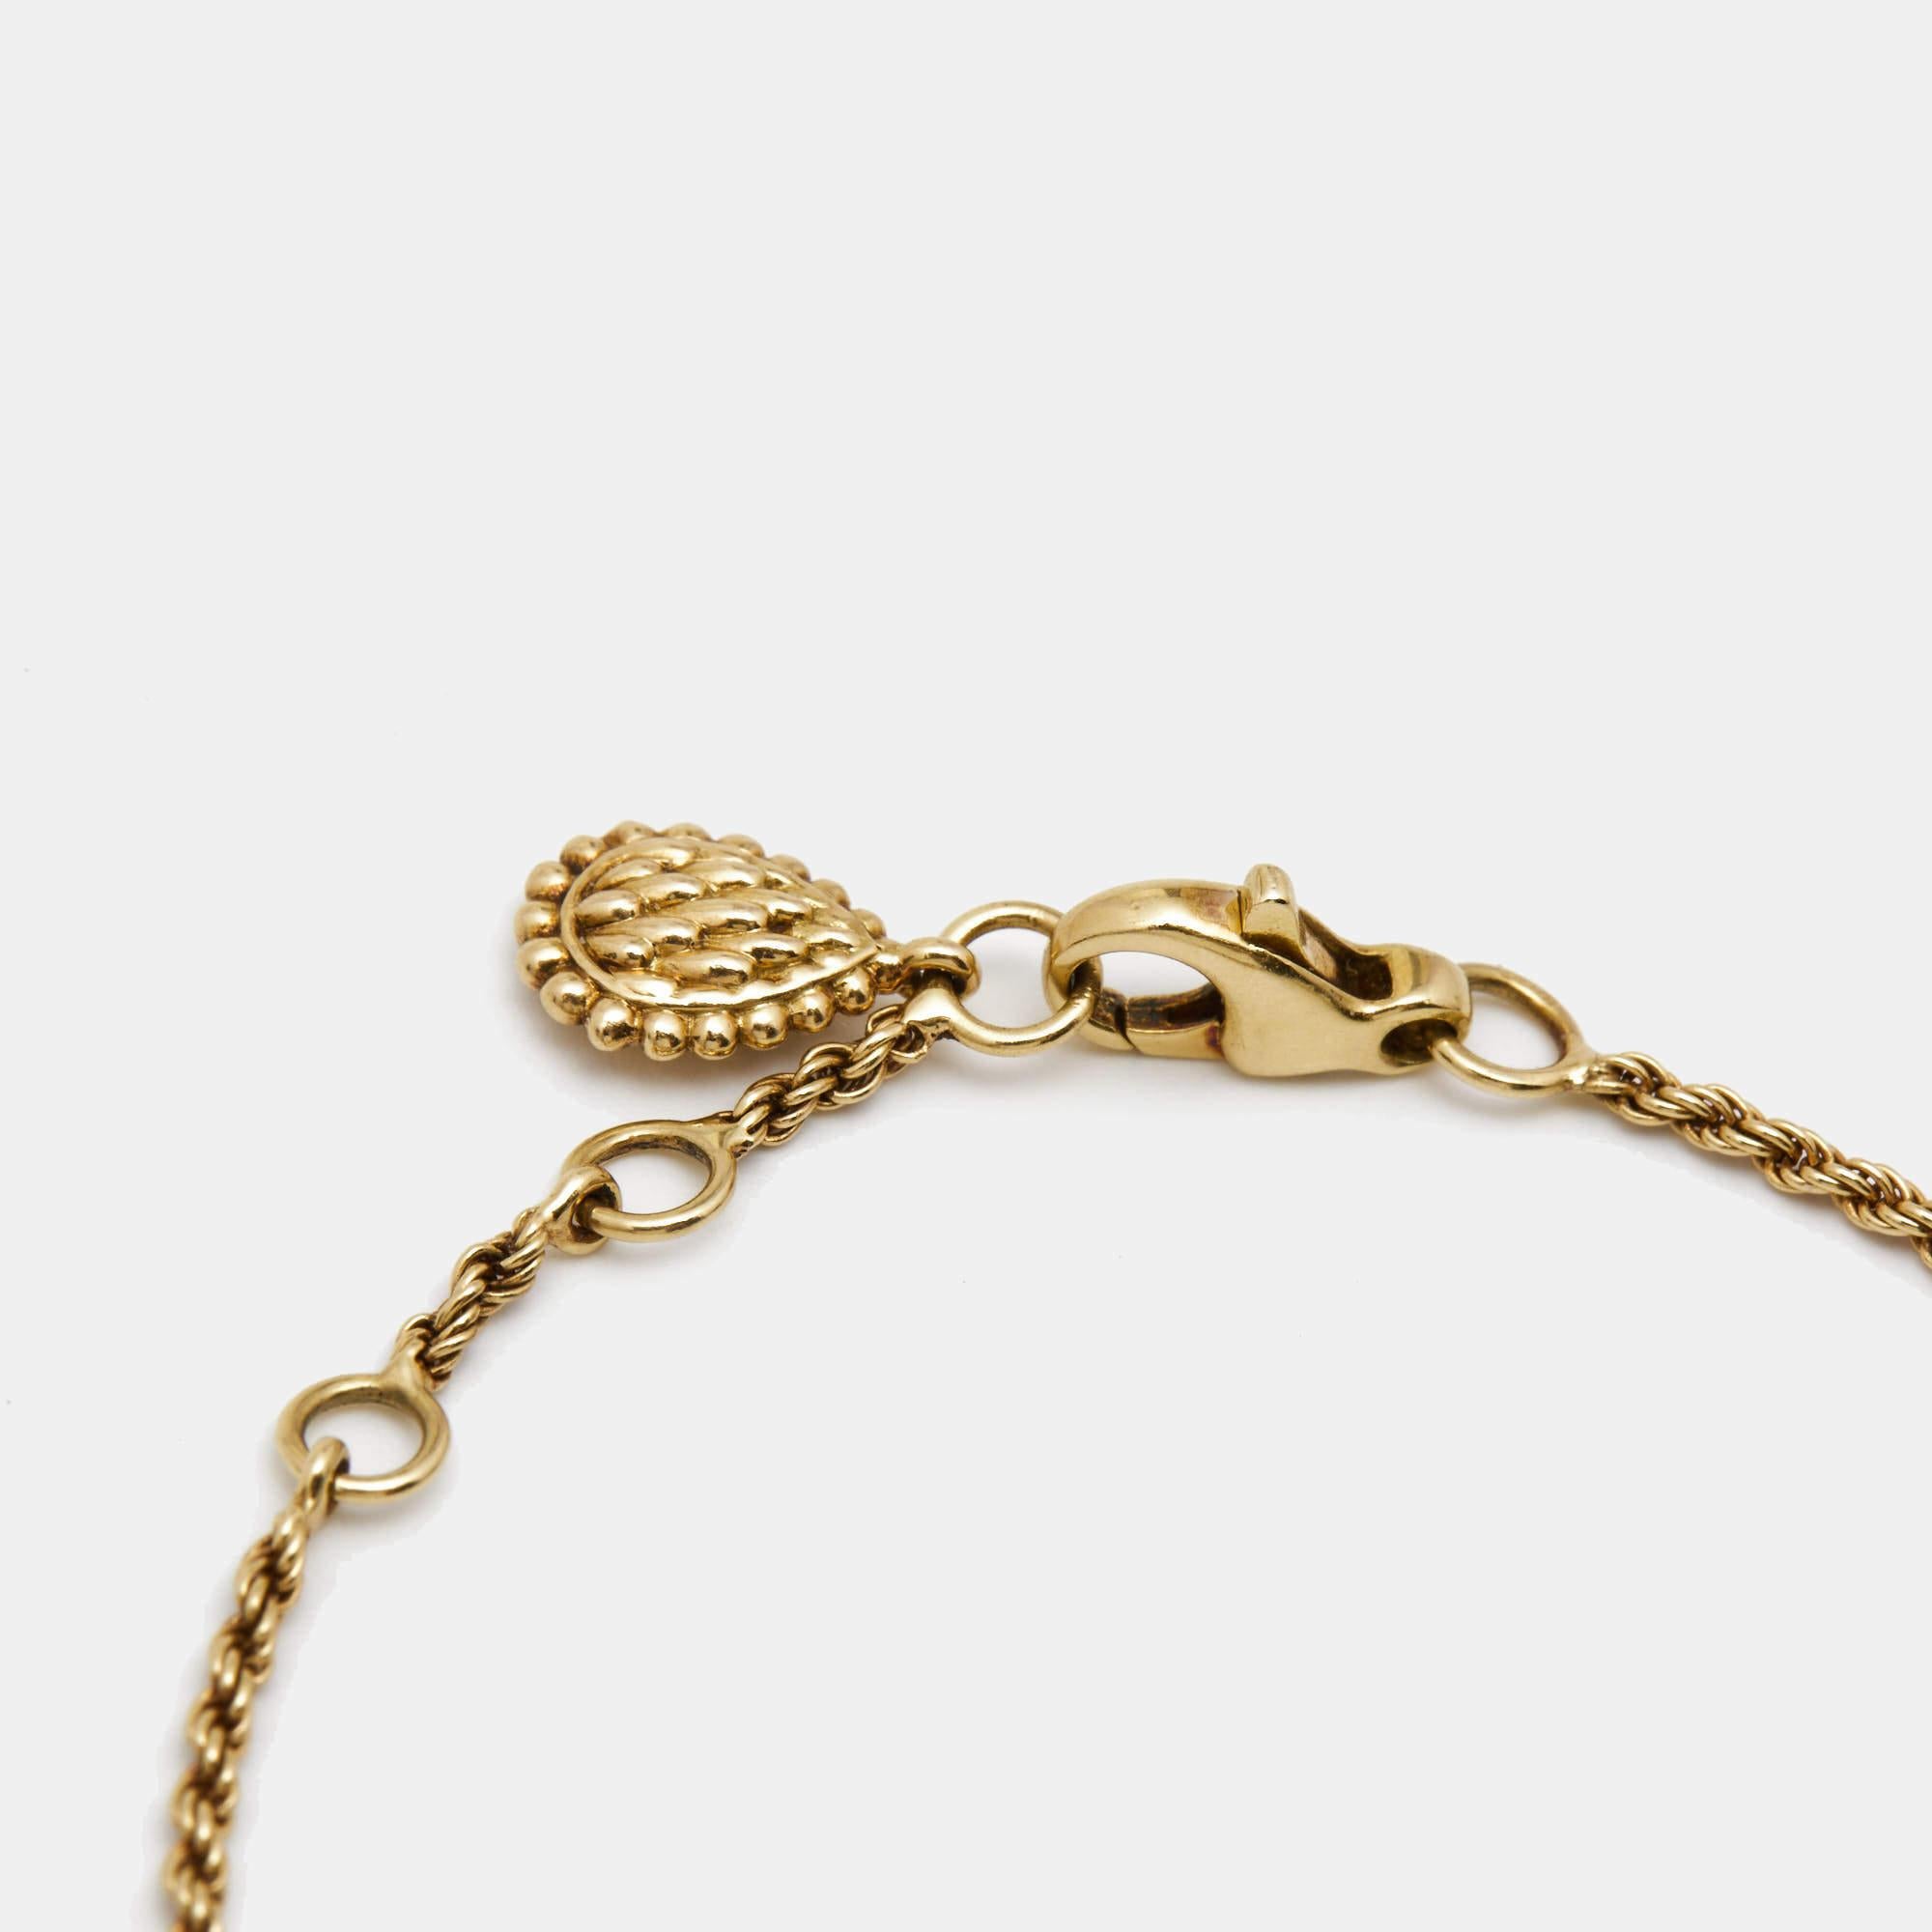 The Boucheron bracelet is a mesmerizing piece of jewelry that exudes elegance and charm. Crafted from luxurious 18k yellow gold, the bracelet features a stunning serpent motif adorned with dazzling diamonds. The intricate design and exquisite